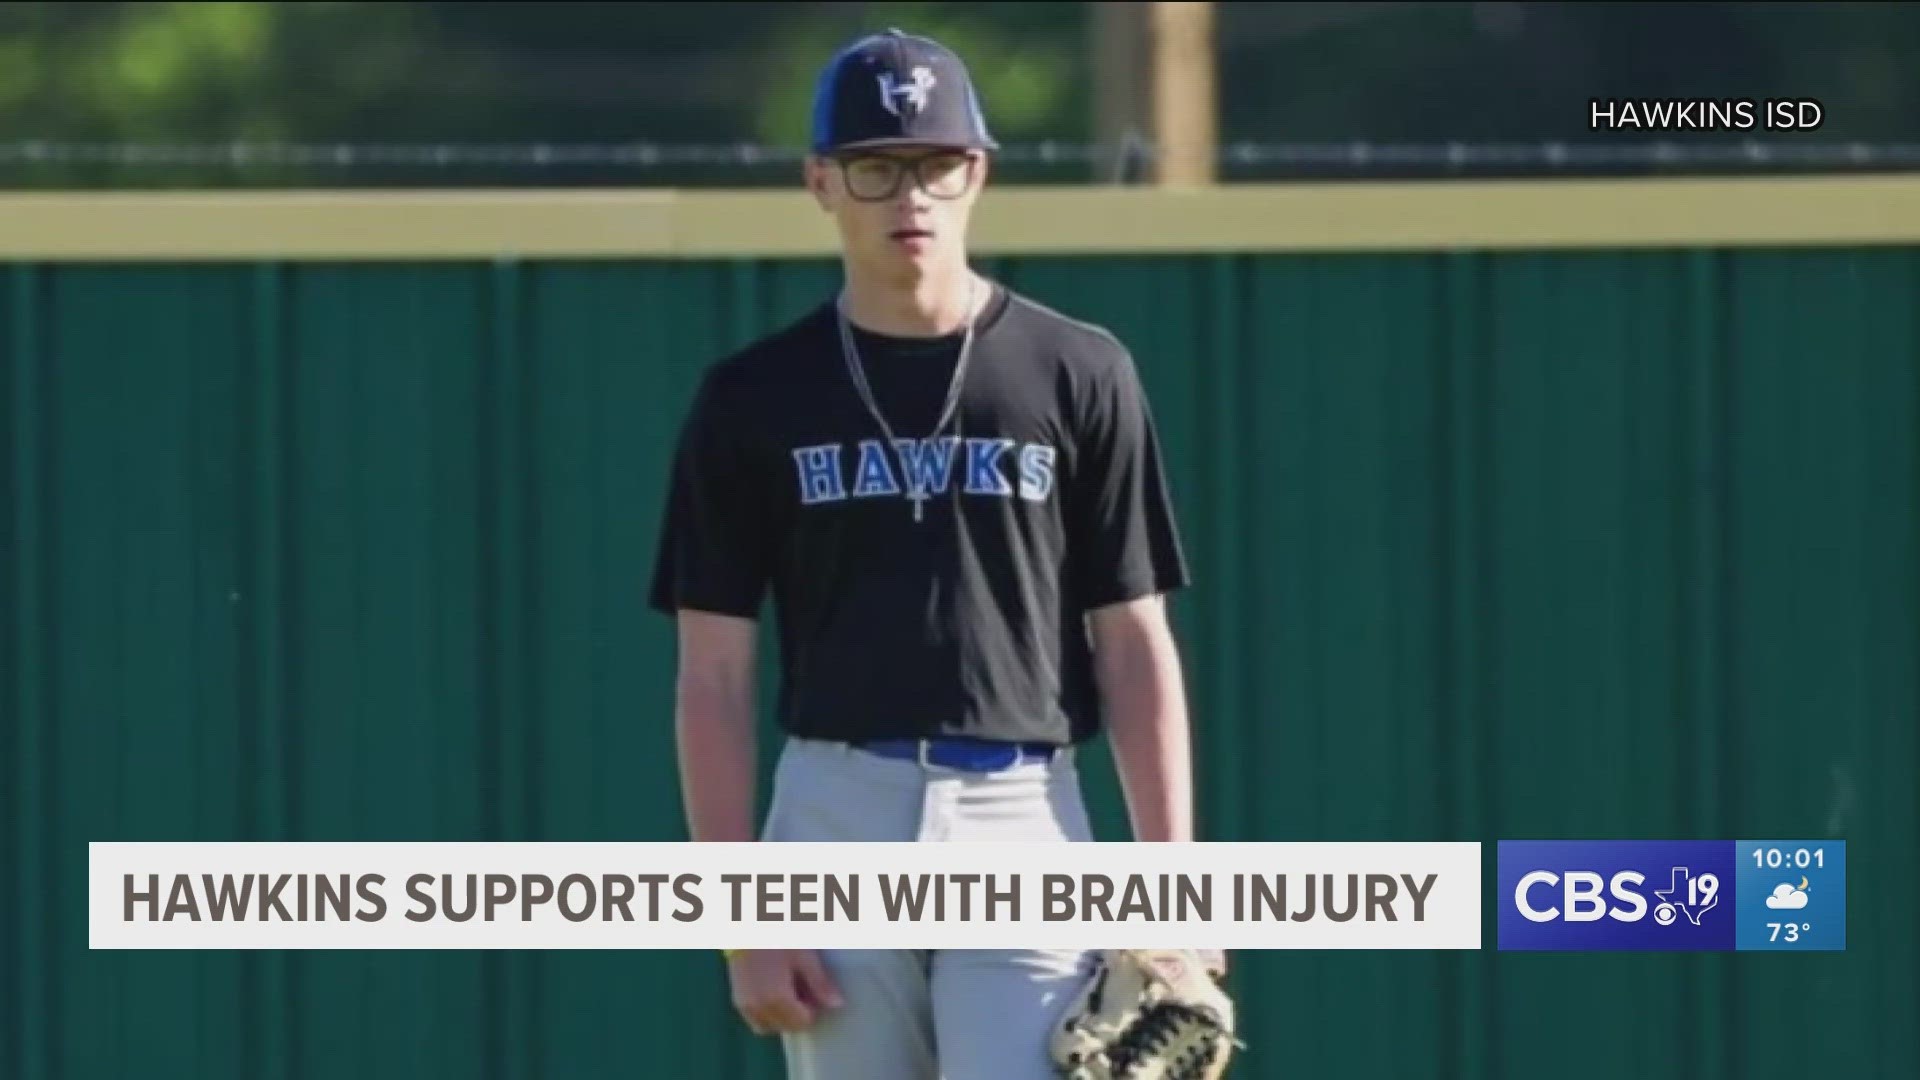 Hawkins ISD confirmed that last Friday night River Hammond was airlifted to a Shreveport hospital after suffering traumatic brain injuries from a car wreck.